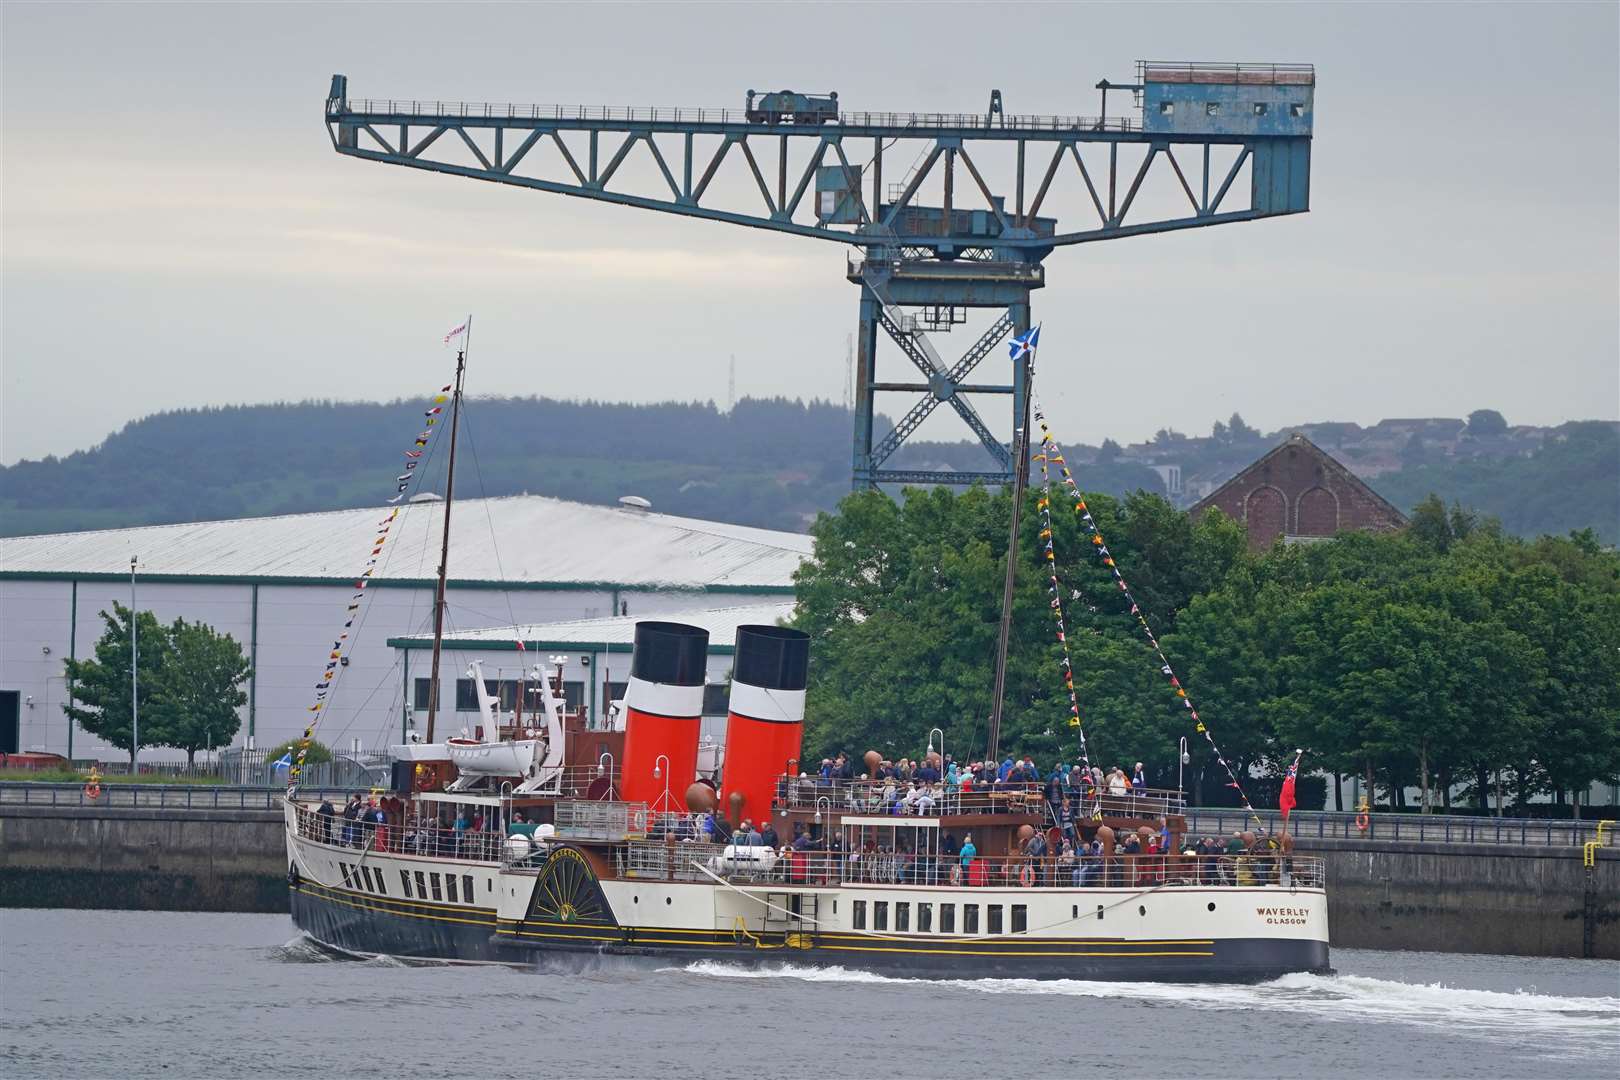 The paddle steamer Waverley celebrated the 75th anniversary of its maiden voyage as it cruised past Clydebank’s Titan crane in June (Andrew Milligan/PA Wire)